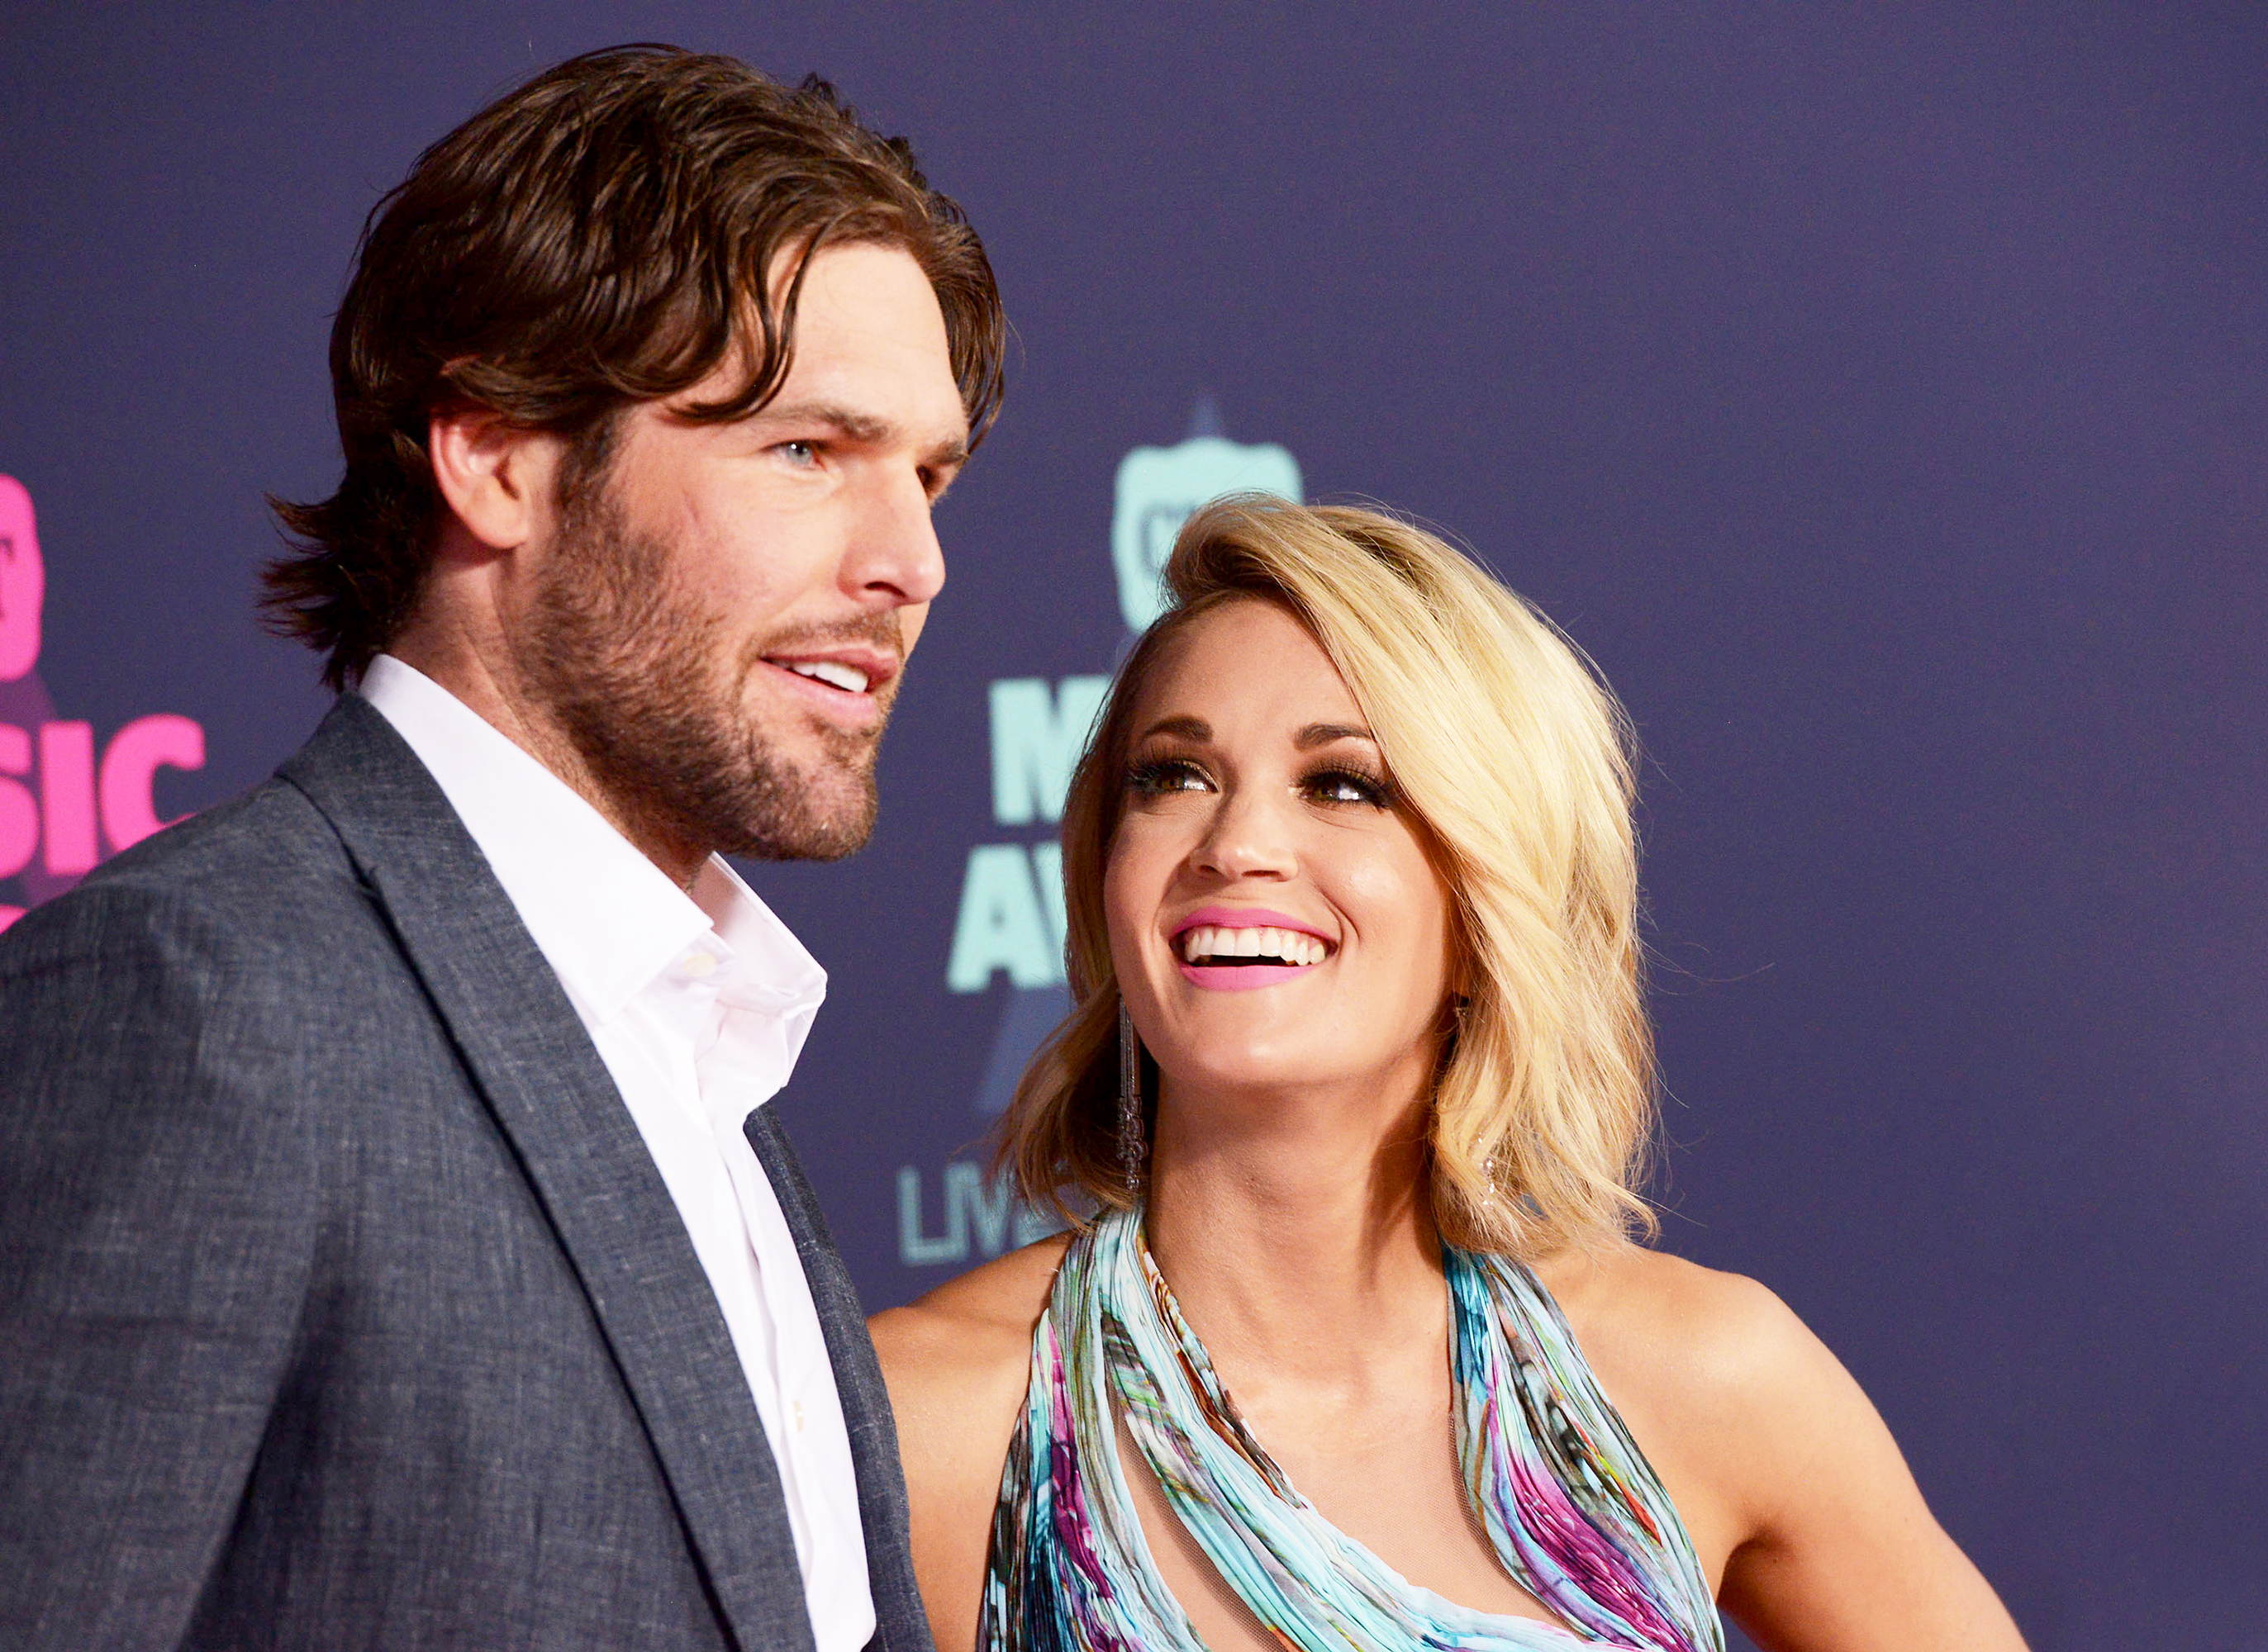 mike-fisher-and-carrie-underwood.jpg?quality=78&strip=all